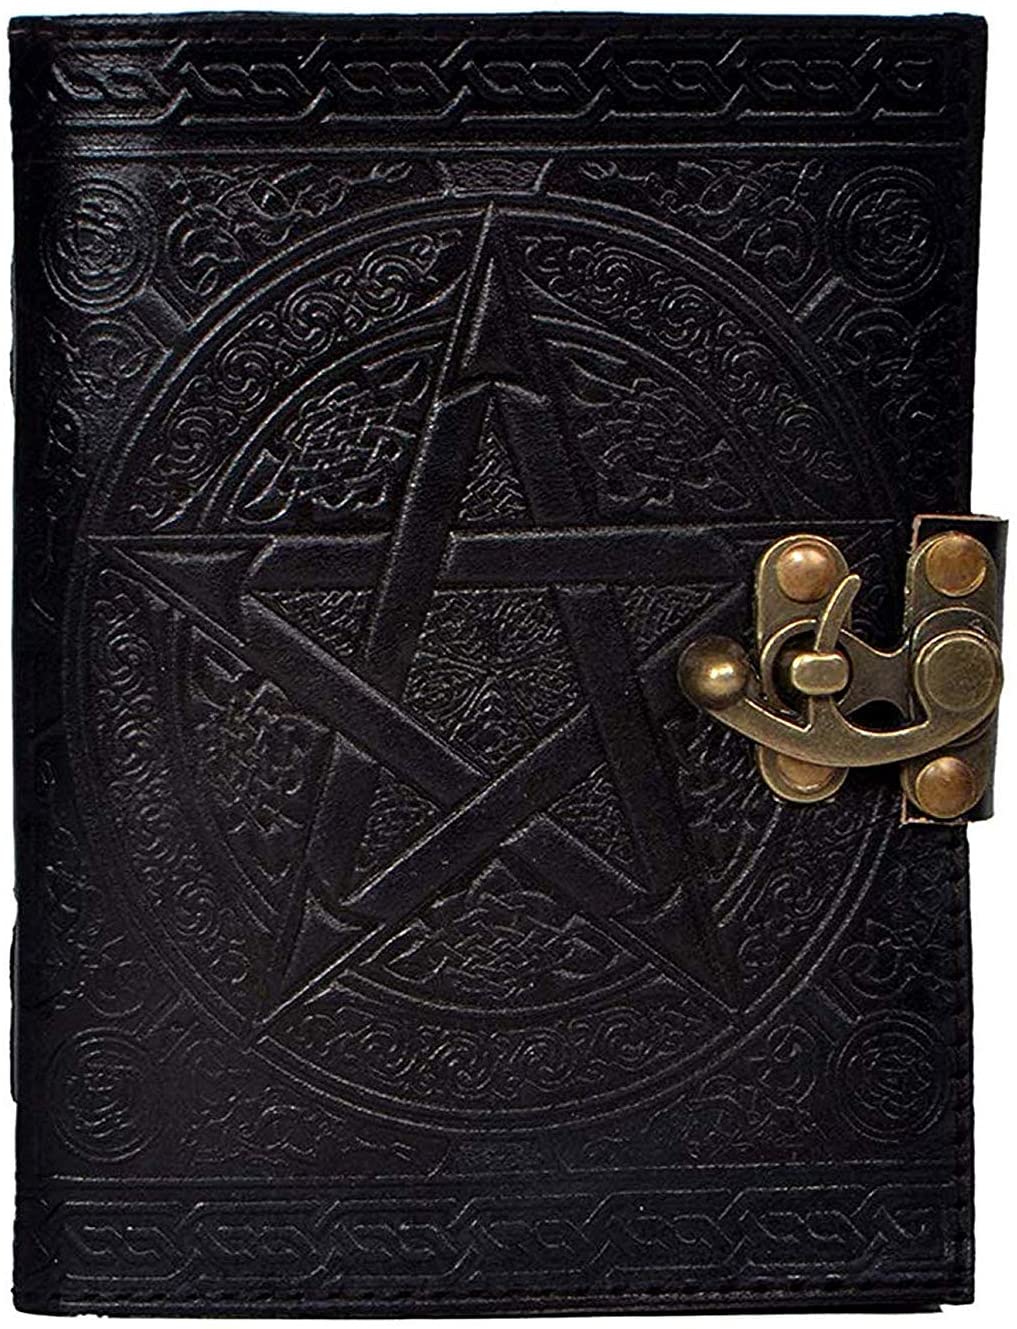 Pagan Wicca Book of Shadows A5 PENTAGRAM Handmade Leather Journal Diary 